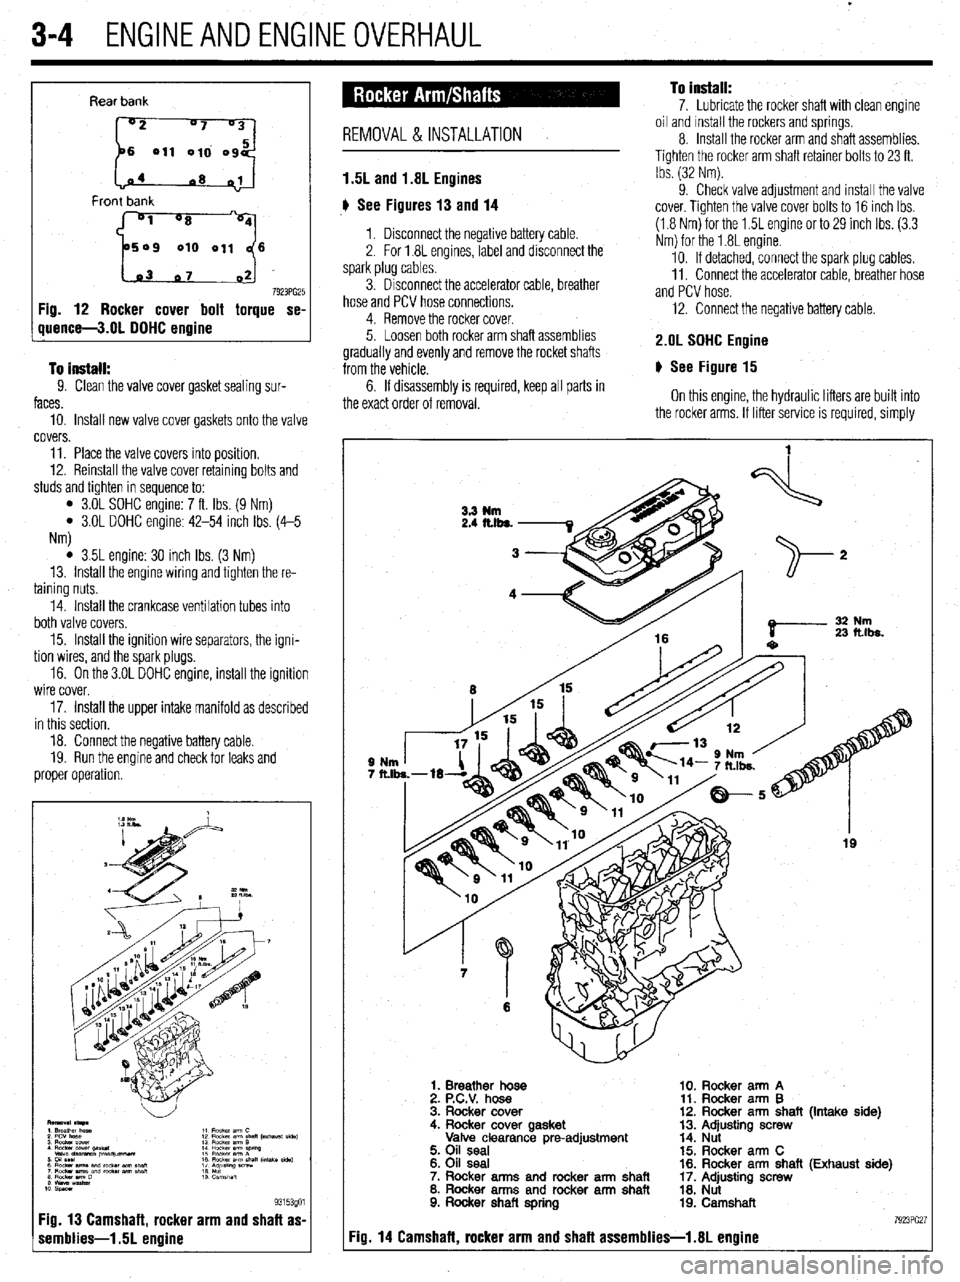 MITSUBISHI DIAMANTE 1900  Repair Manual 3-4 ENGINEANDENGINEOVERHAUL 
Rear bank 
6 011 010 og 
1.03 07 02] 
7923PG25 Fig. 12 Rocker cover bolt torque se- 
quence-3.01 DOHC engine 
To install: 
9. Clean the valve cover gasket sealing SW 
face